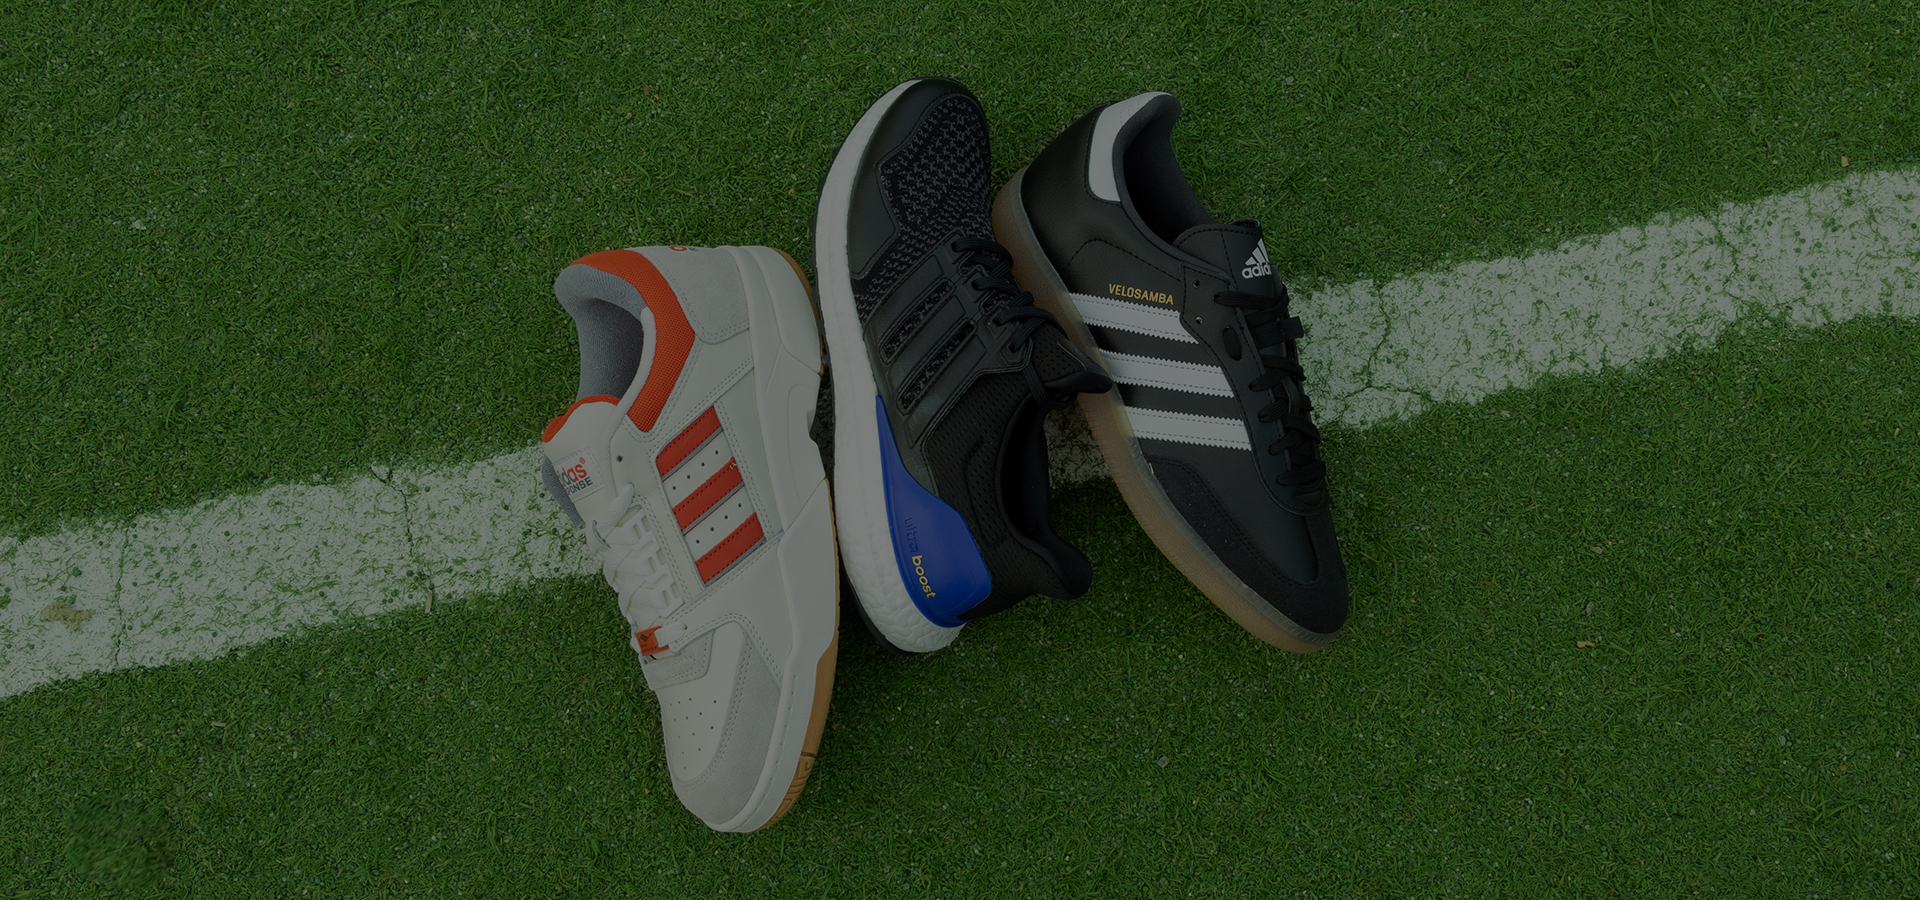 Gear Up With adidas Footwear For Summer’s Most Exciting Sports